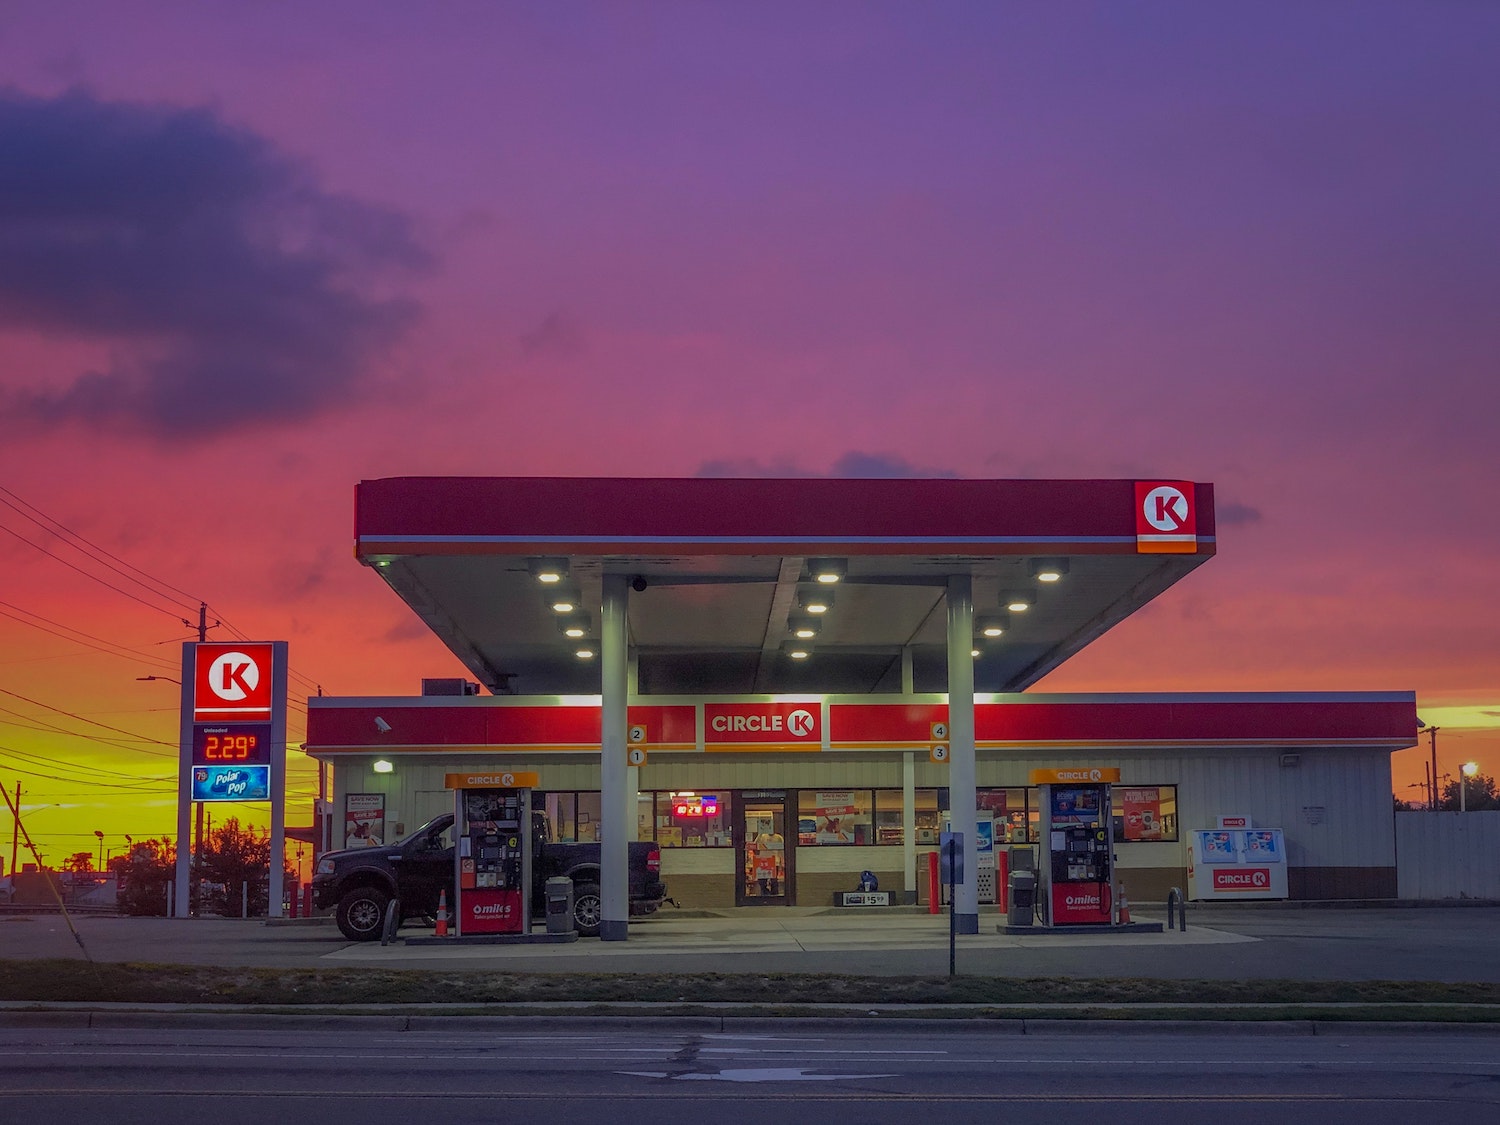 The sunrising over a gas station and convenience store on a deserted highway.